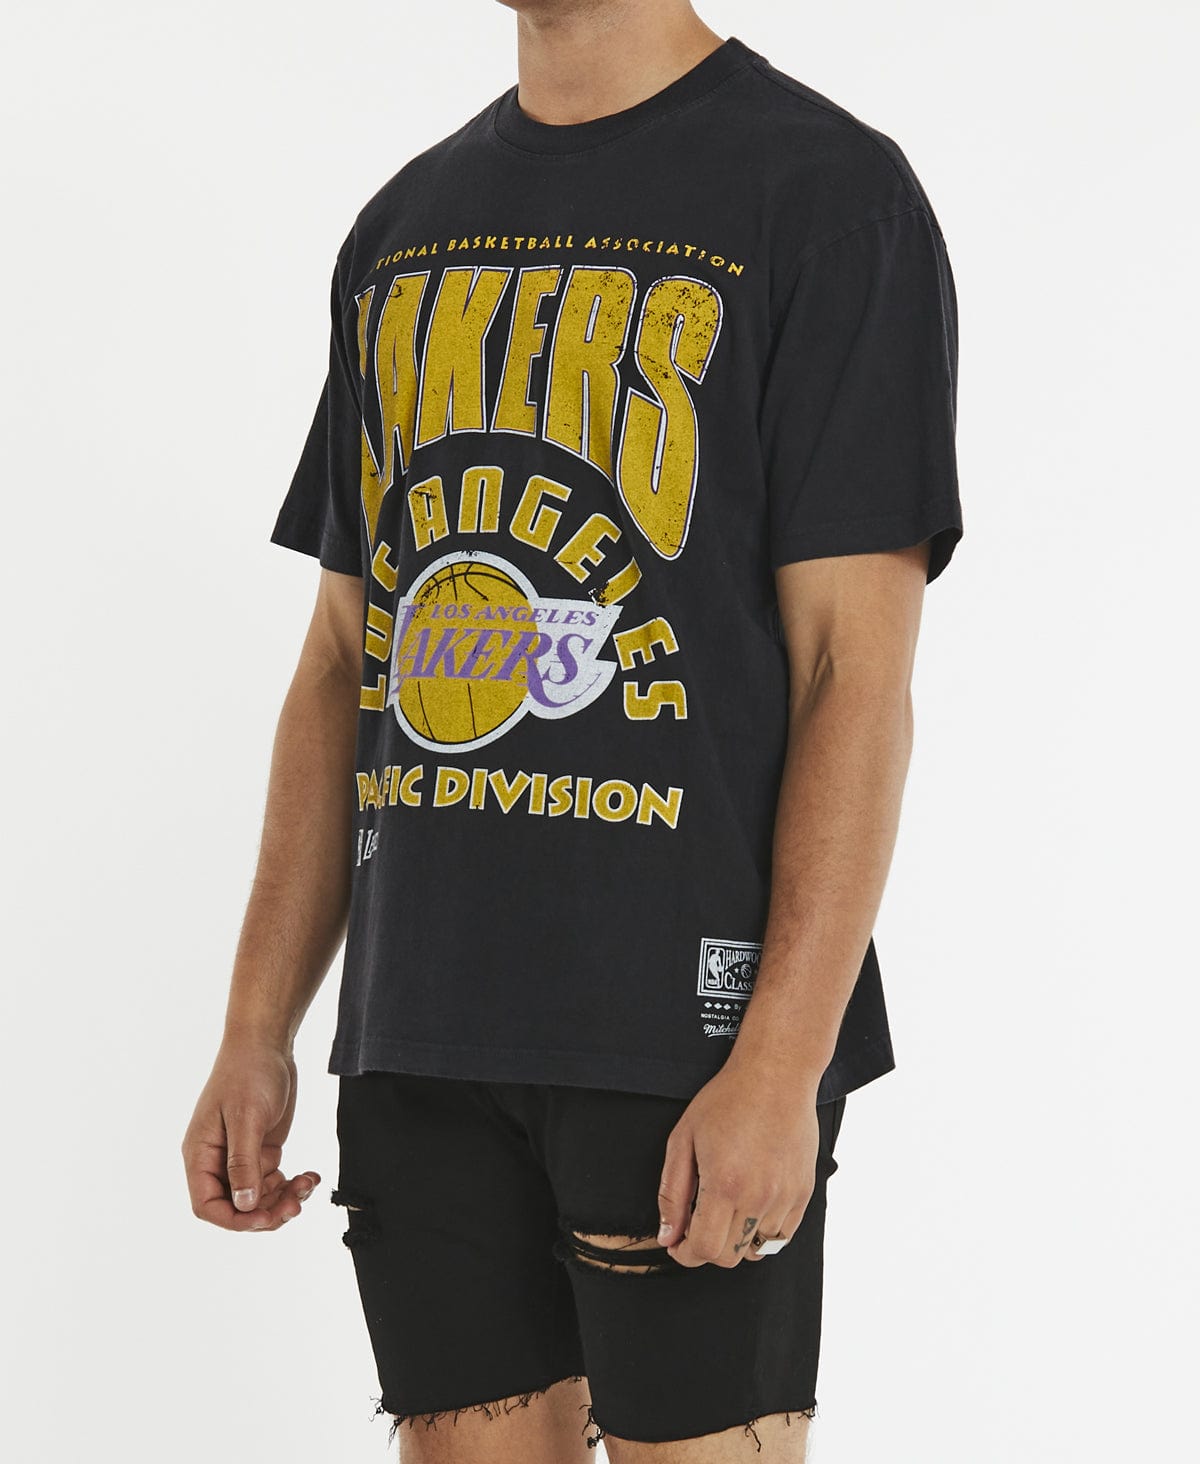 LA Lakers Division Arch Faded Purple Tee